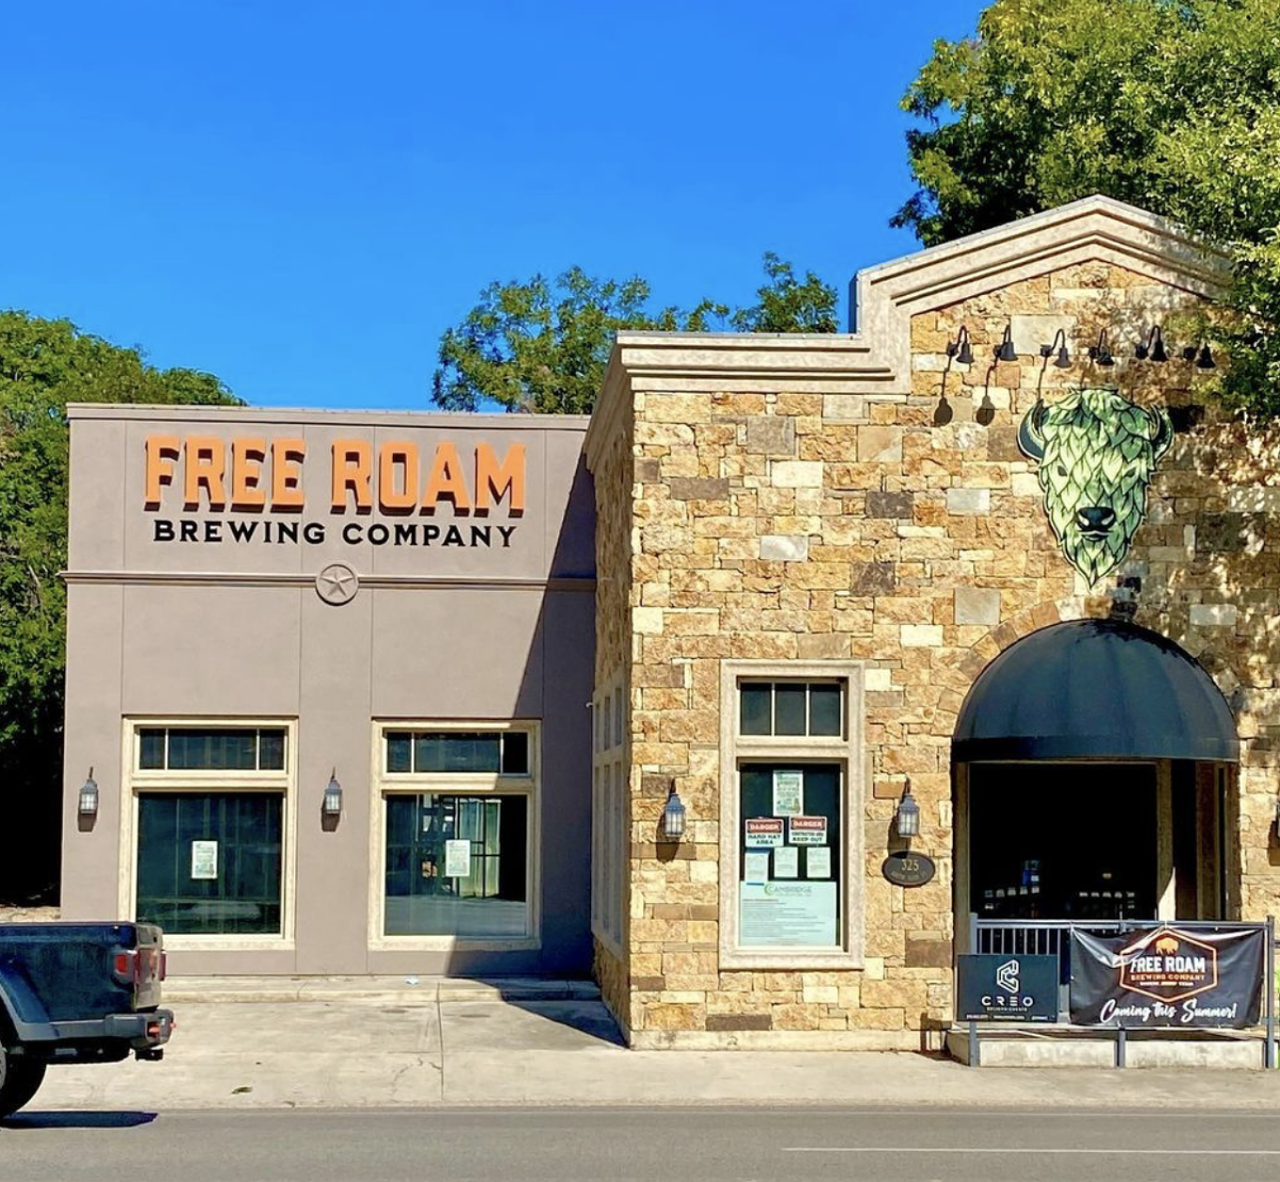 Free Roam Brewing Company
325 S. Main St., Boerne, freeroambrewing.com
Former San Francisco Giants pitcher Jeremy Affeldt will open the new craft brewery in the old Boerne Liberty Stable in the small town's bustling center.  
Photo via Instagram / freeroambrewingcompany 